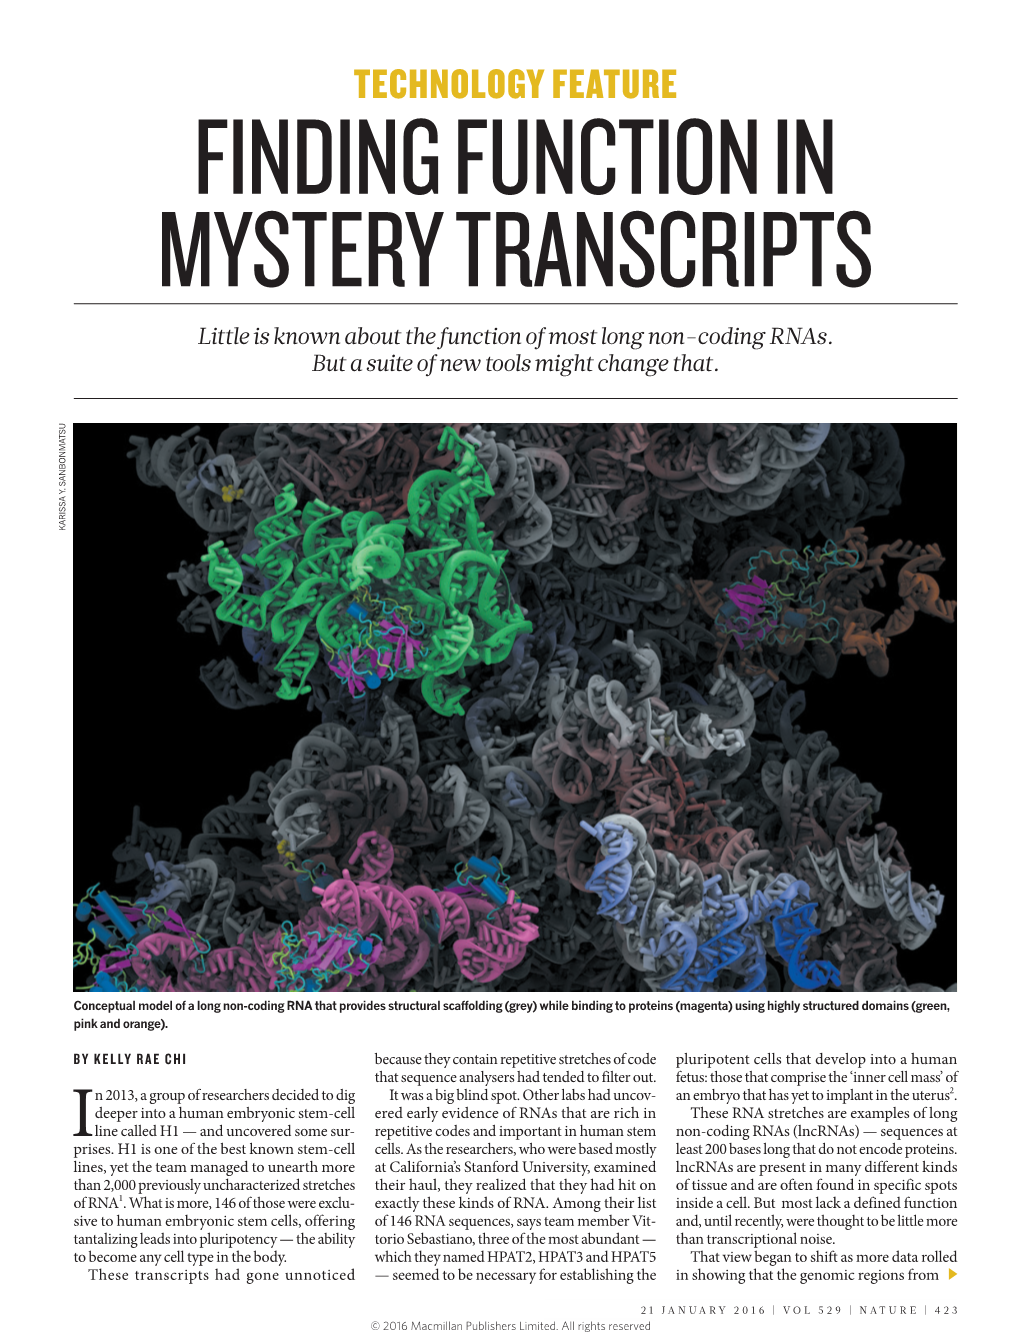 FINDING FUNCTION in MYSTERY TRANSCRIPTS Little Is Known About the Function of Most Long Non-Coding Rnas